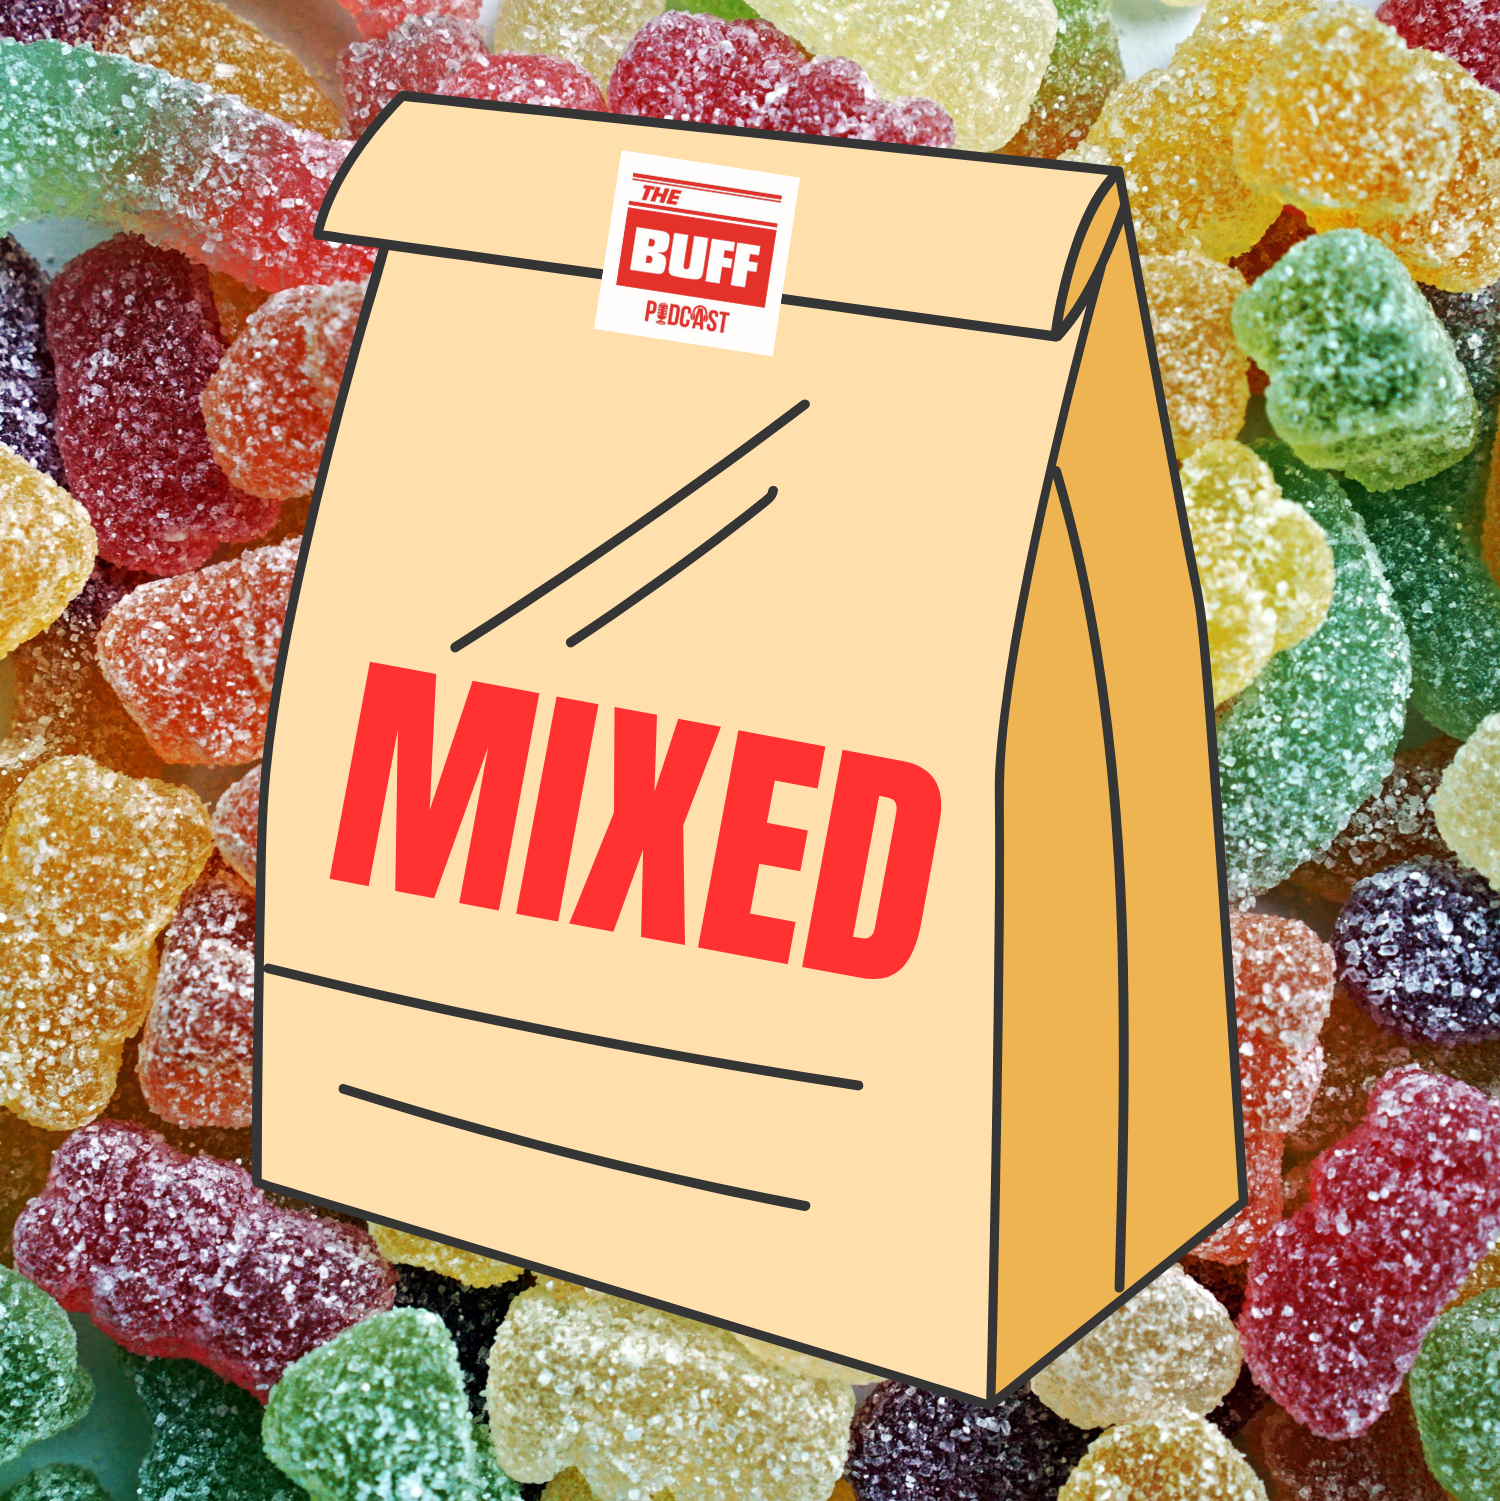 The Buff presents: A bag of Bolton Wanderers pick and mix